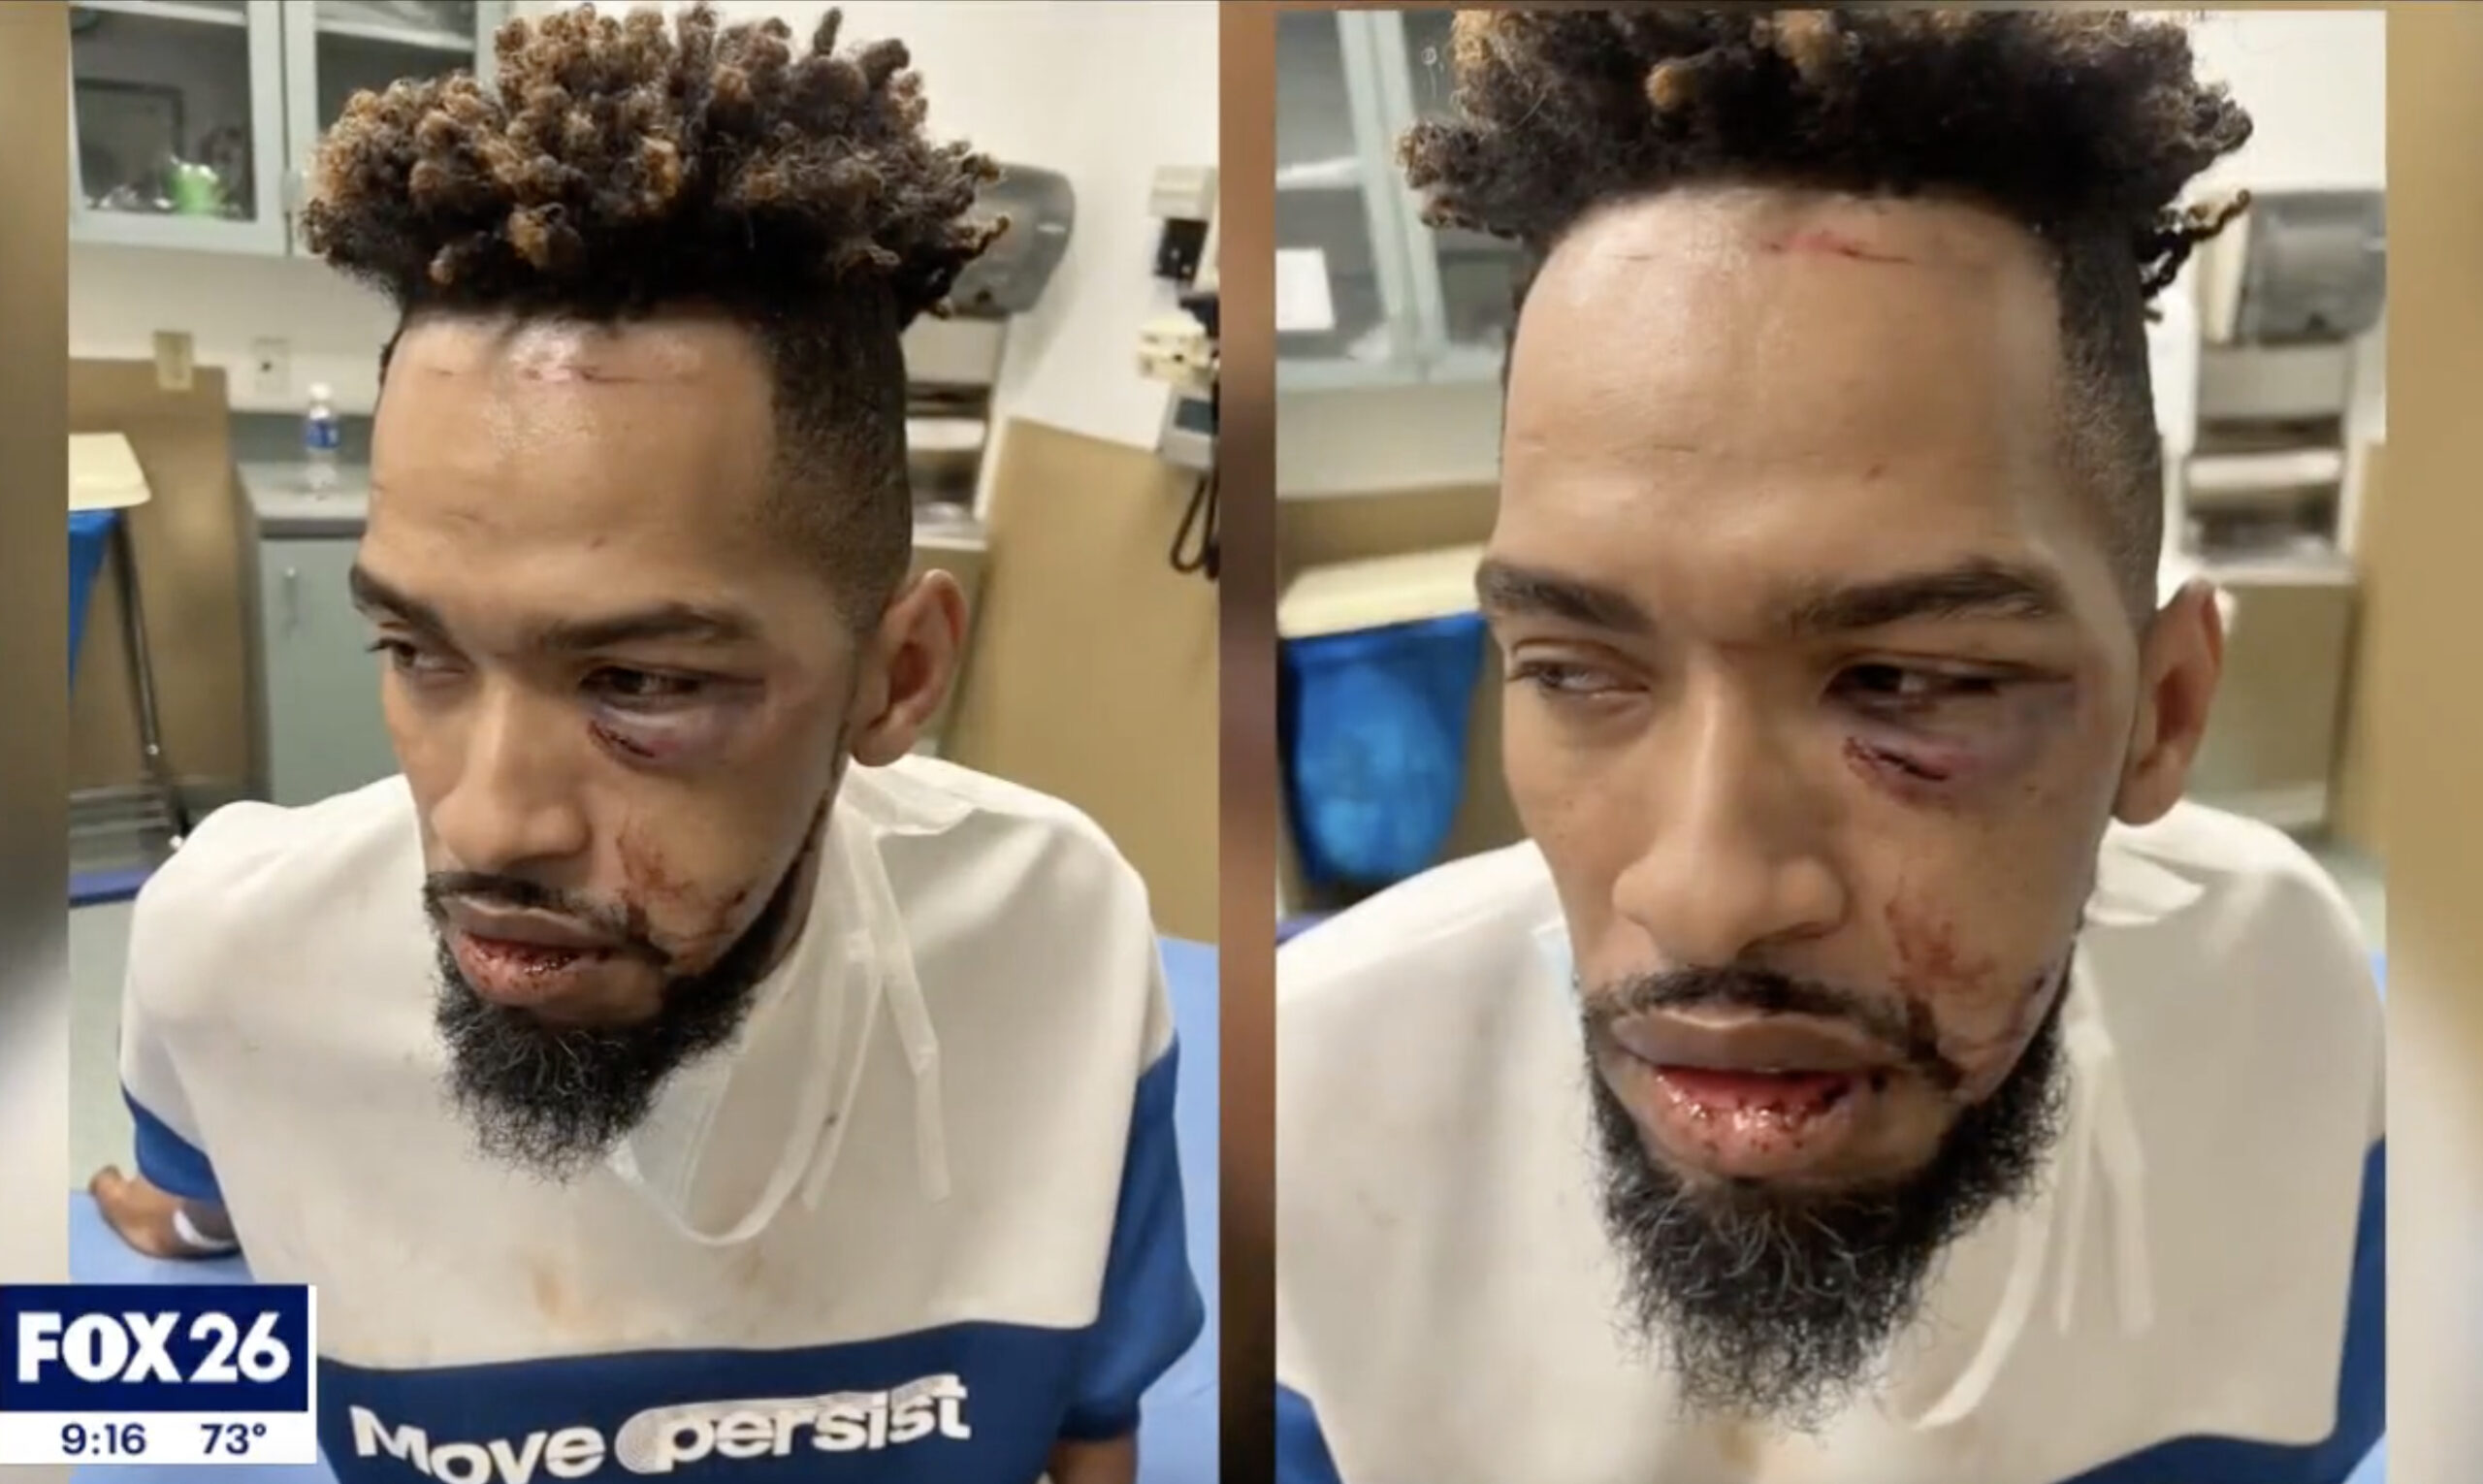 Bouncers beat up gay man in shocking video